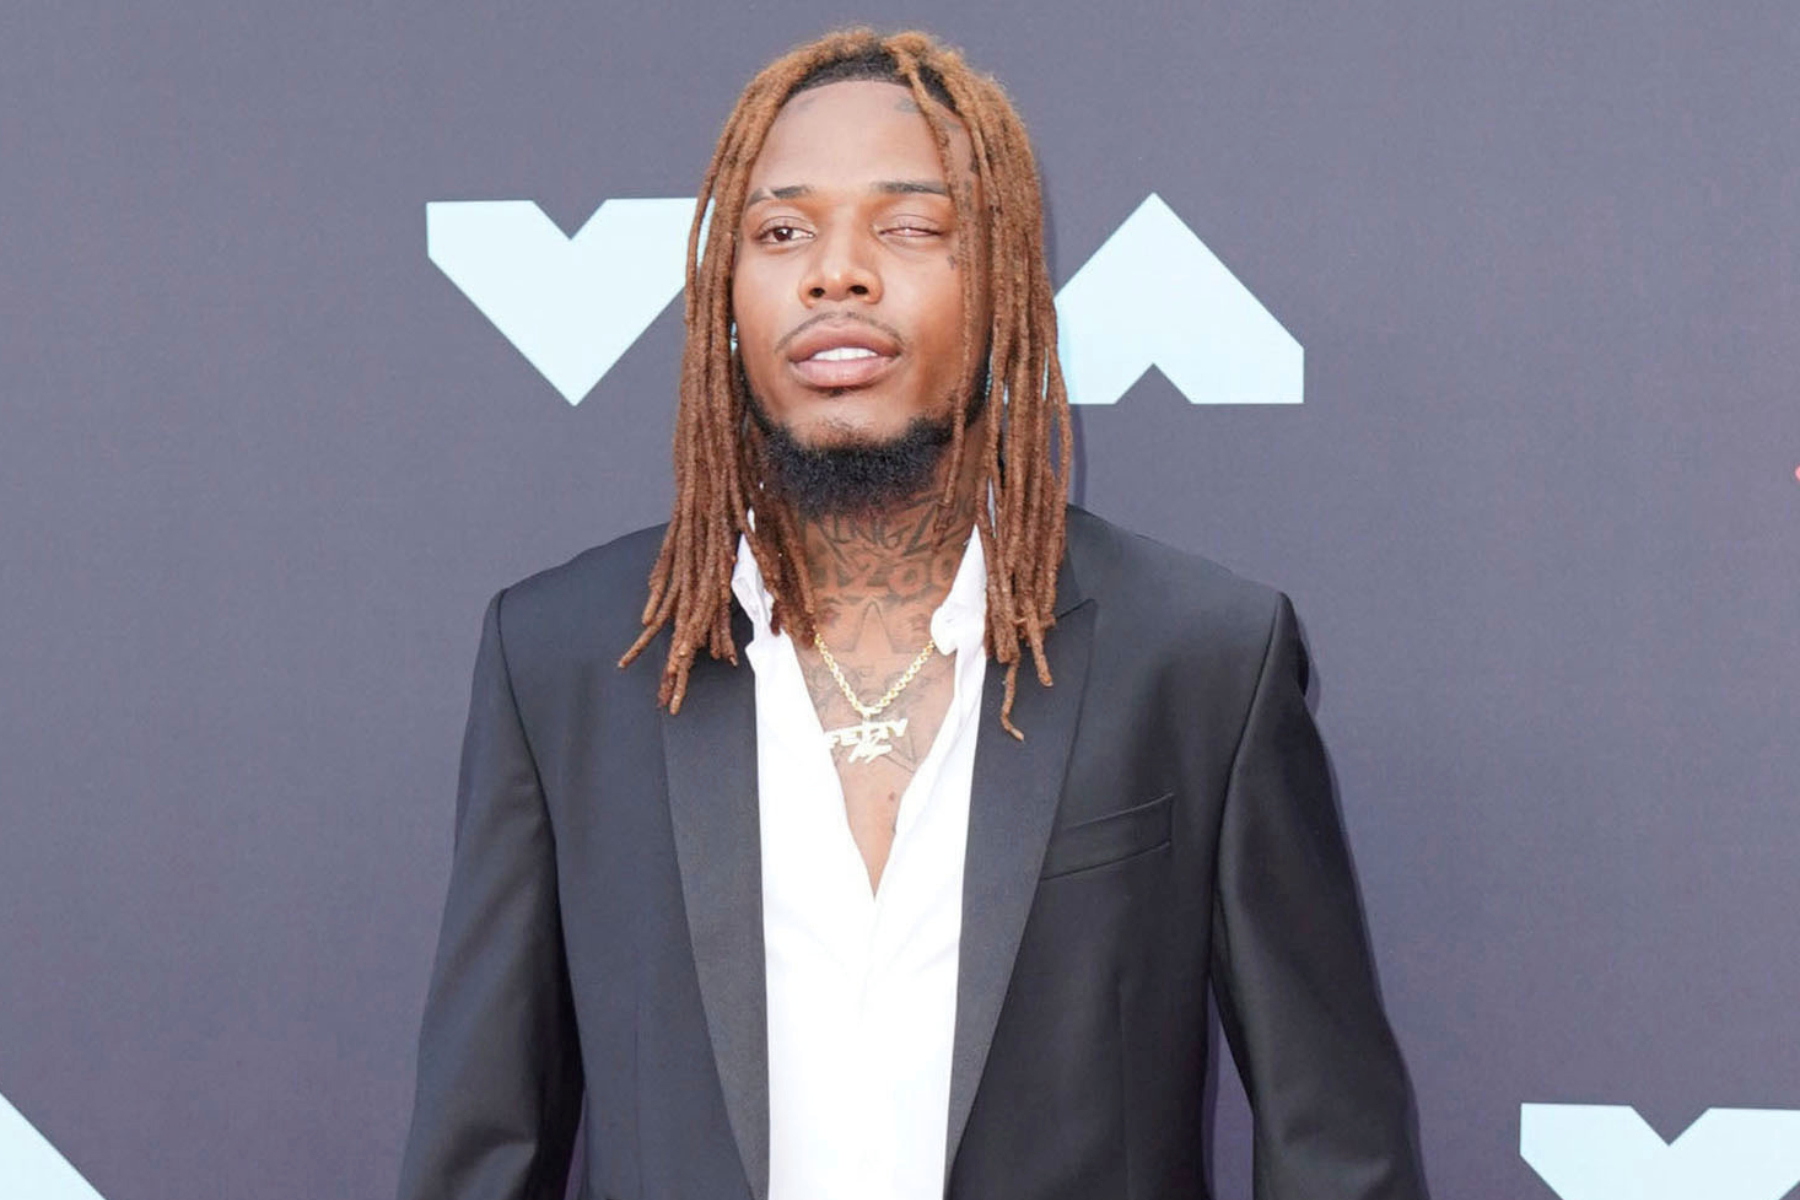 Fetty Wap Arrested for Threatening to Kill Someone